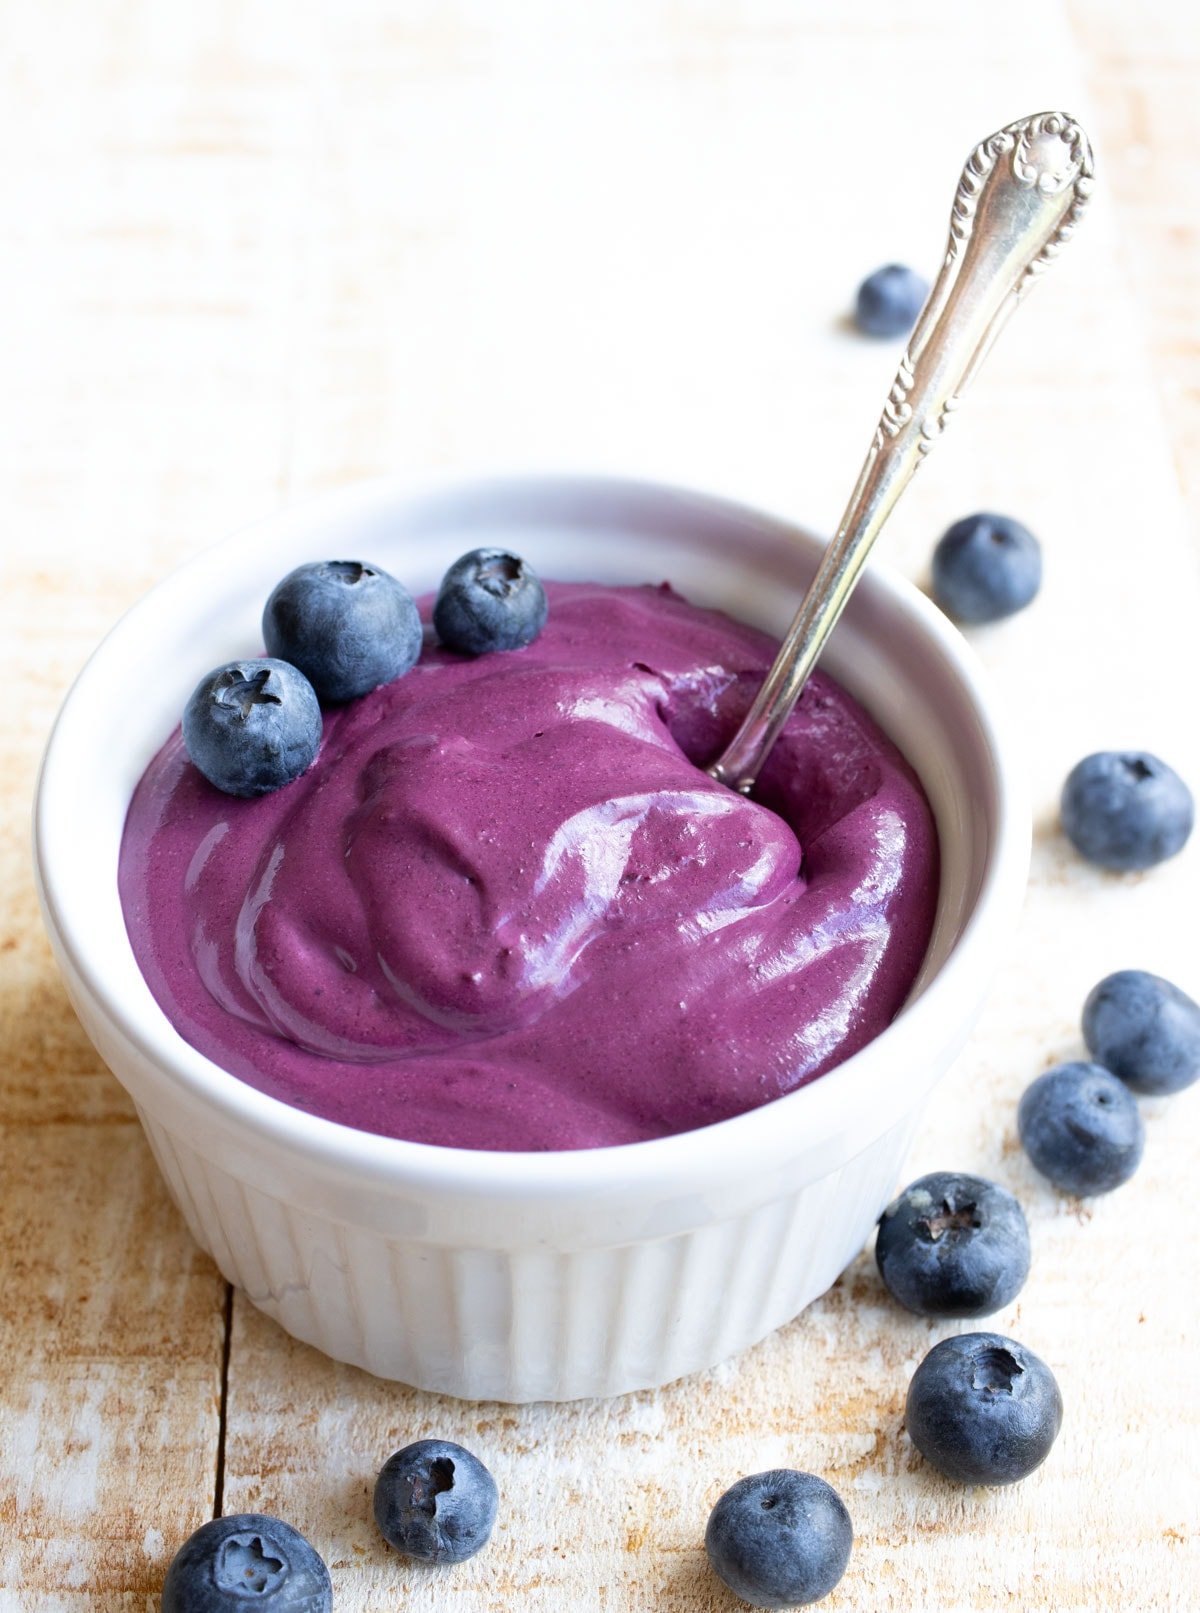 Blueberry cream cheese in a bowl with a spoon.